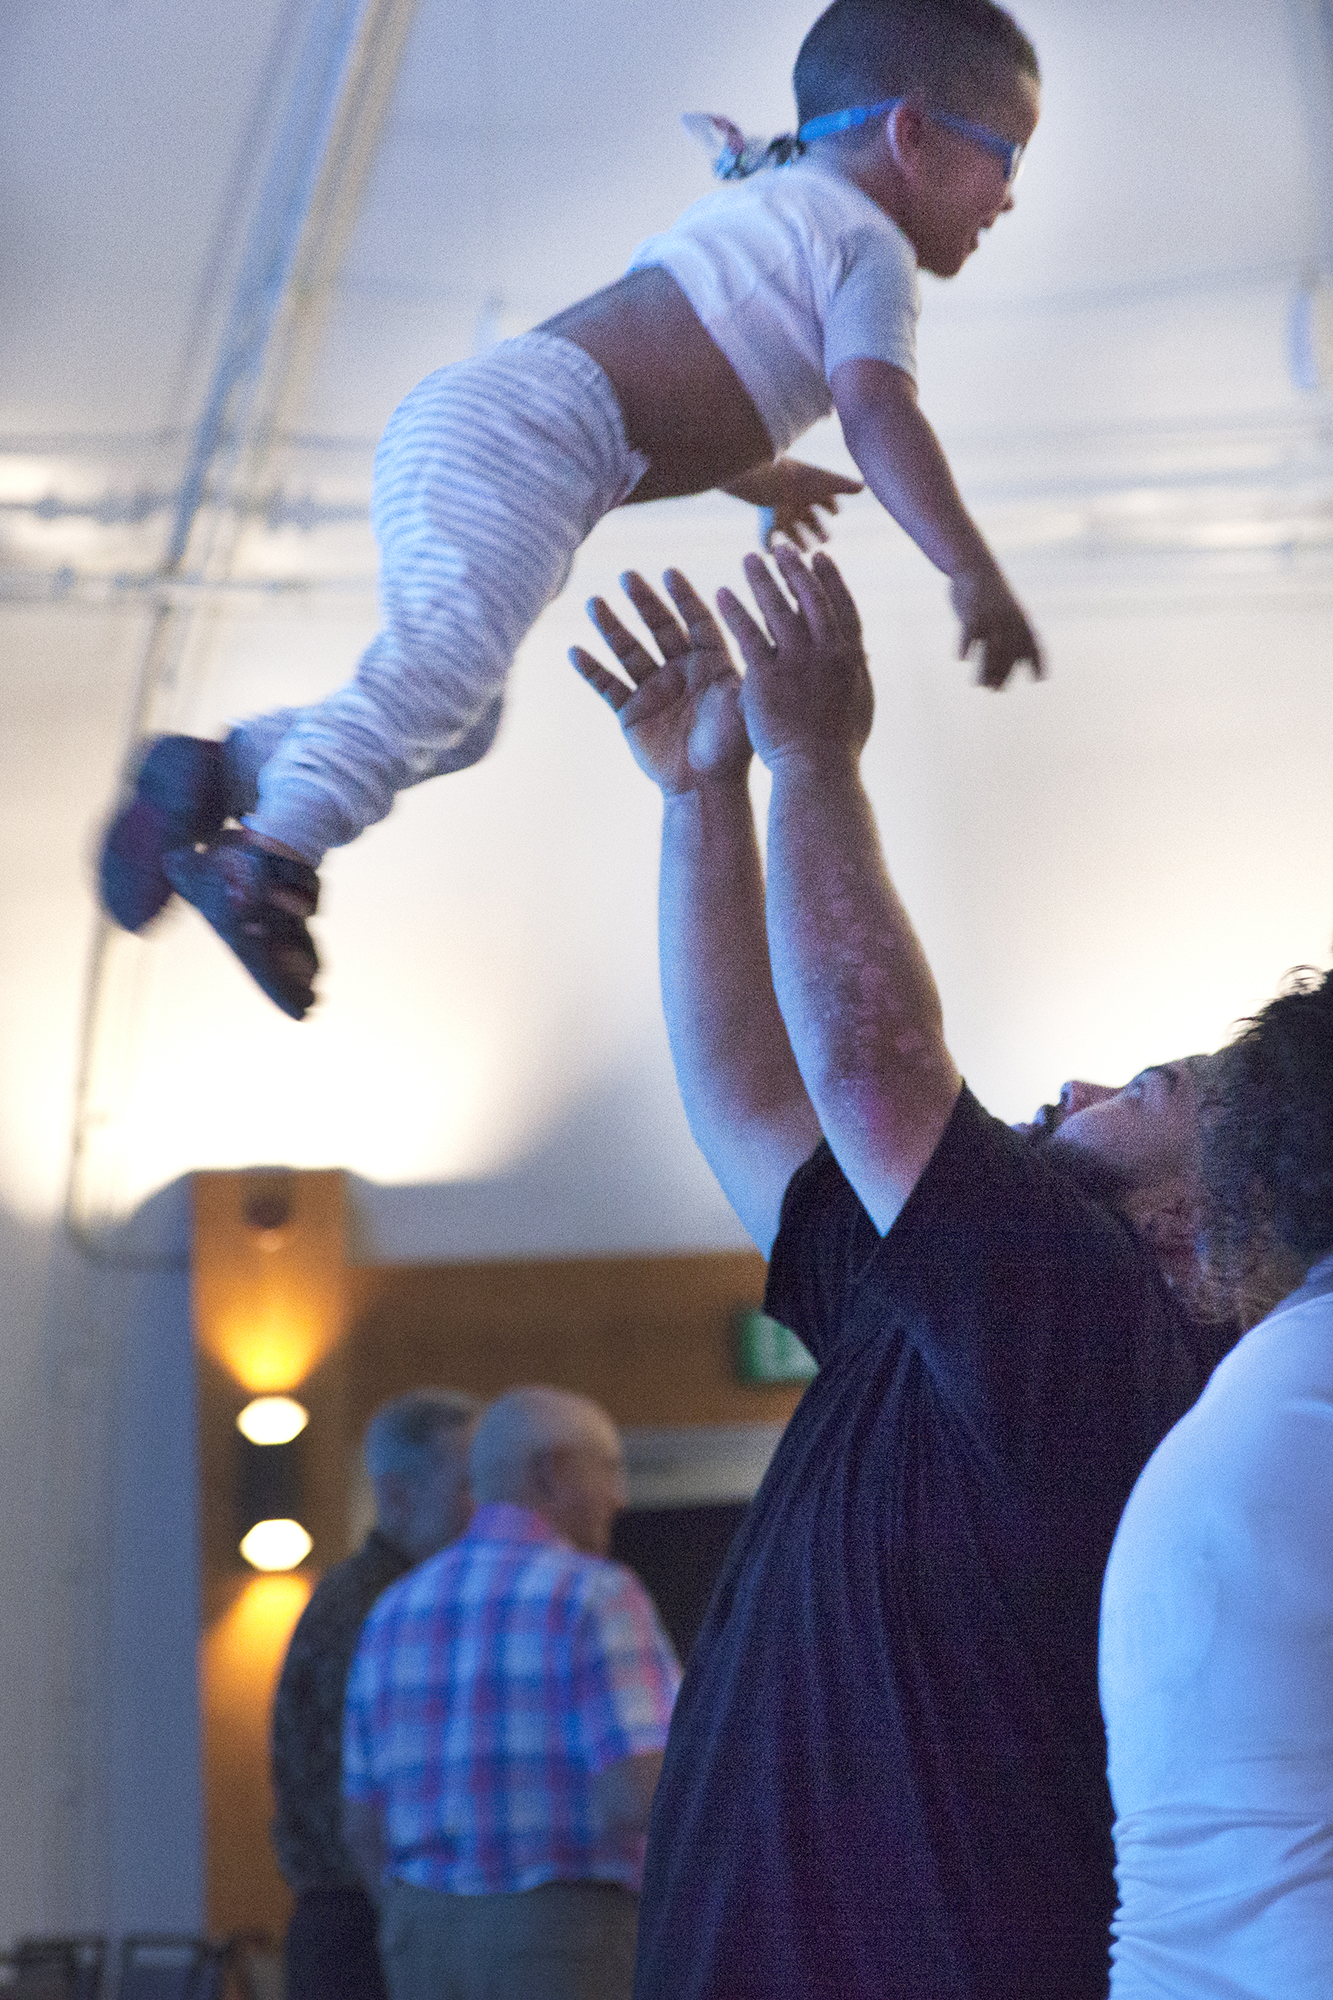 Dad tossing boy in the air